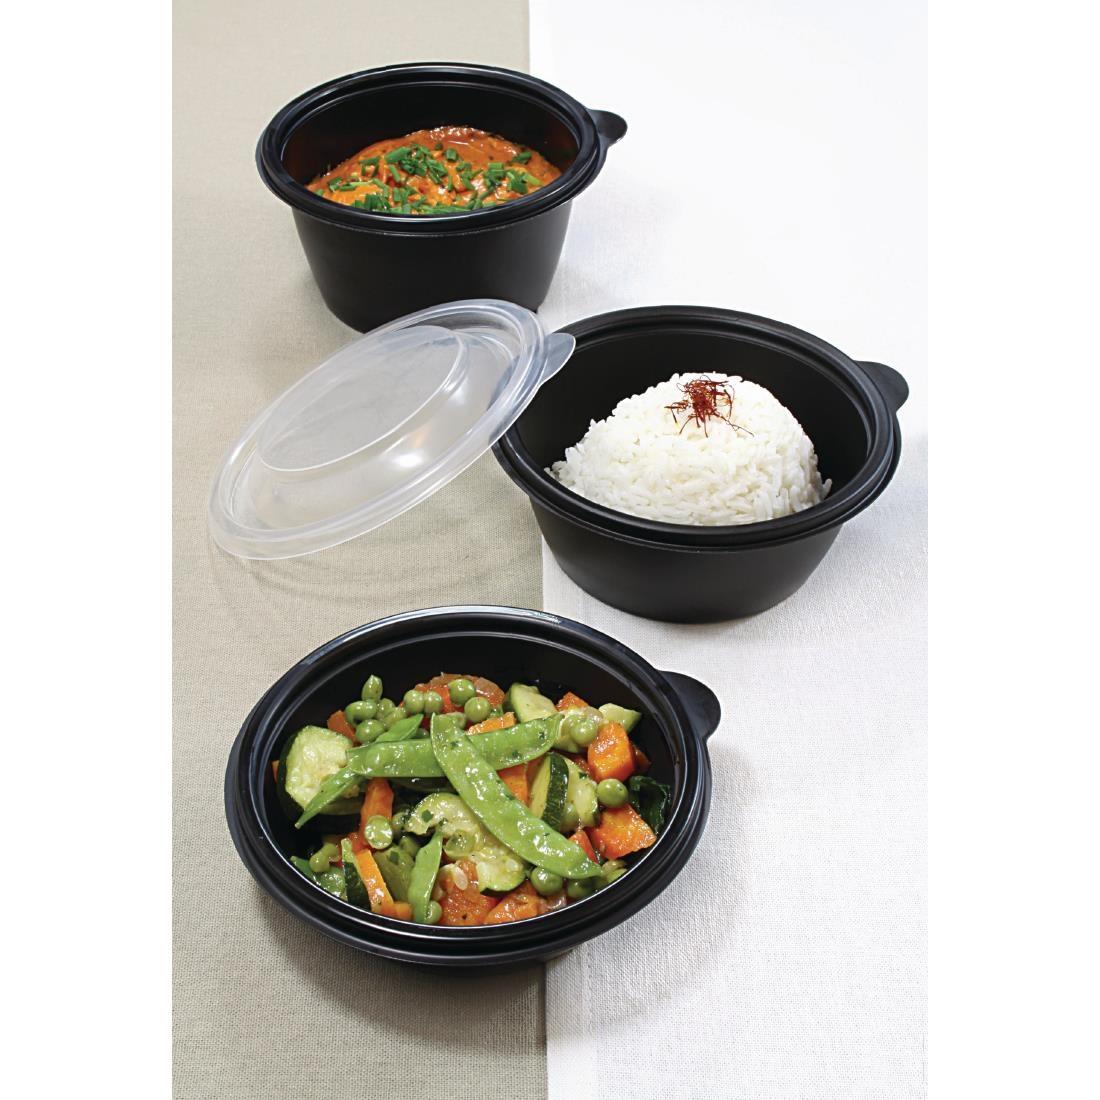 Fastpac Small Round Food Containers 375ml / 13oz (Pack of 500) - DW788  - 6